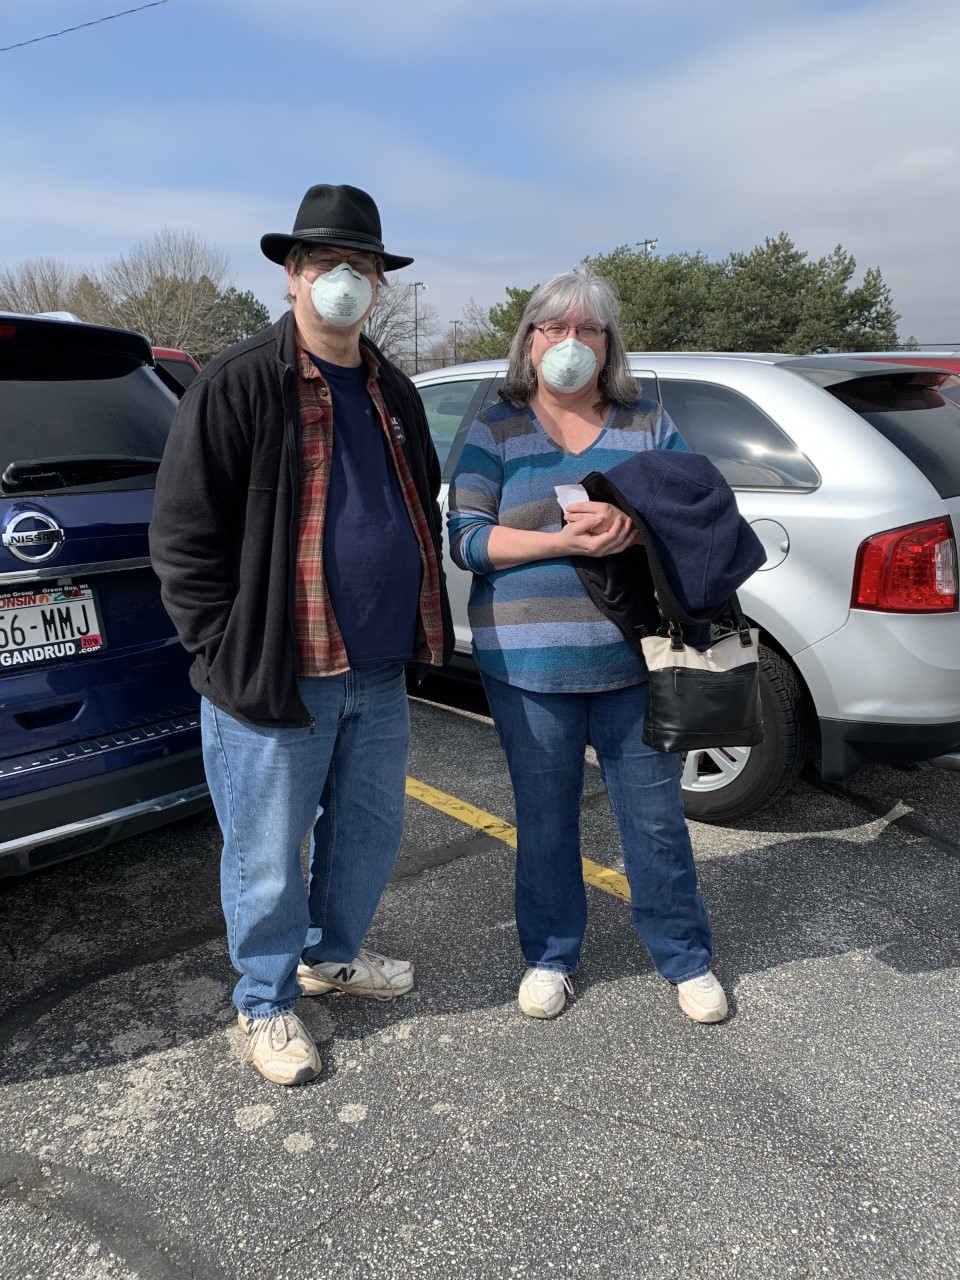 Beth Ferrier and her husband are pictured outside their polling place on April 7, 2020.